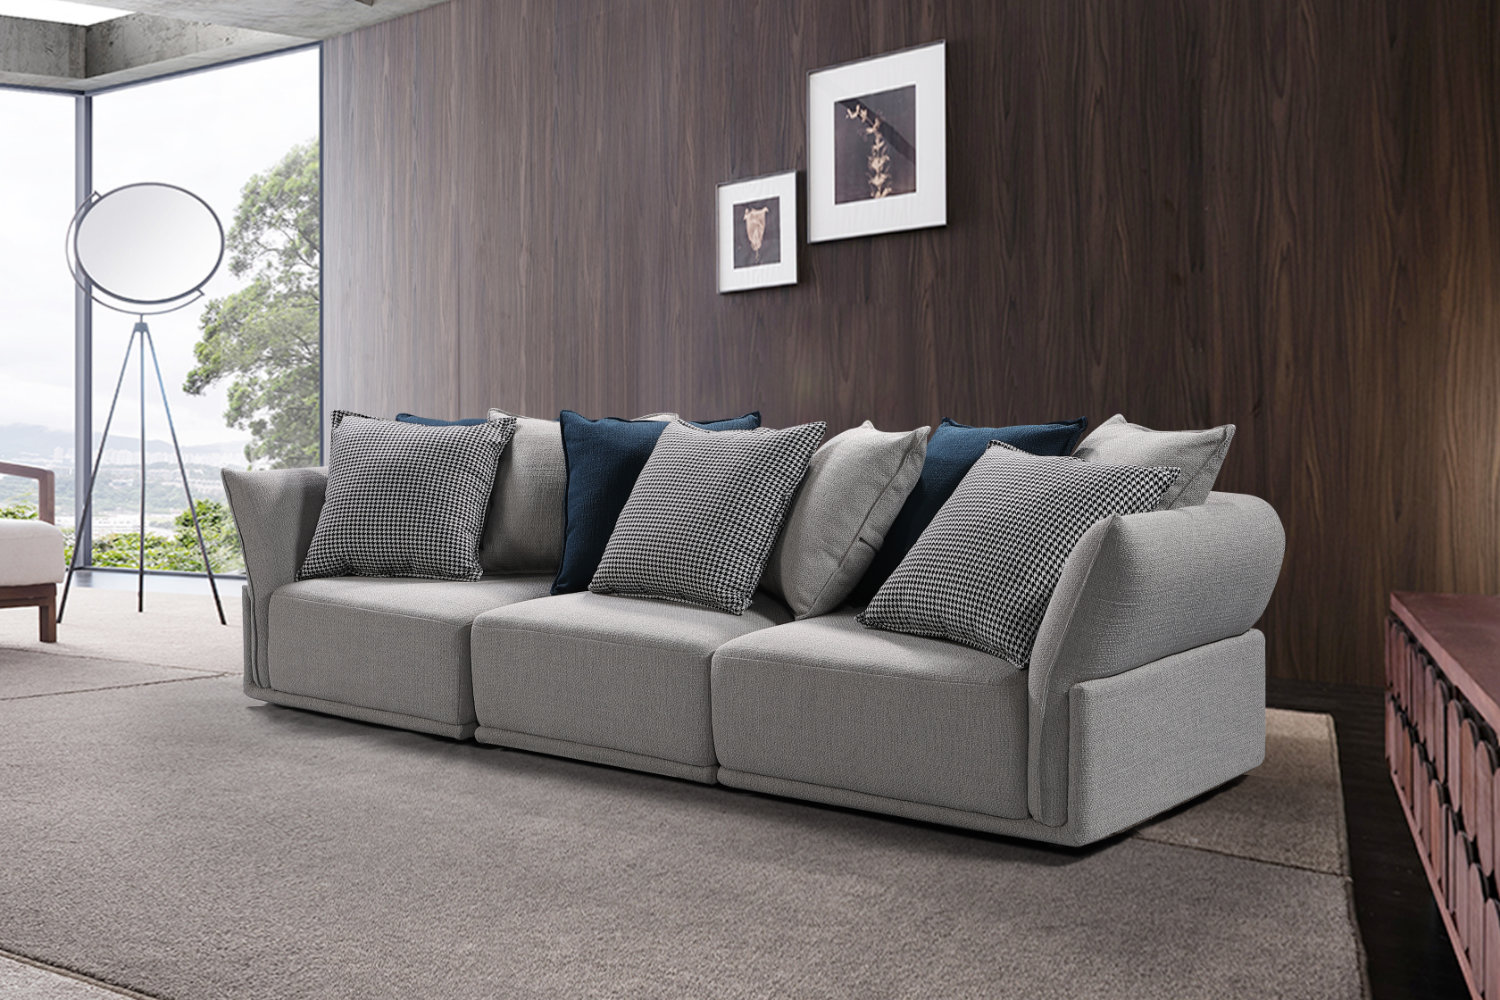 Sectional Couches And Modular Sofas For Sale In Las Vegas